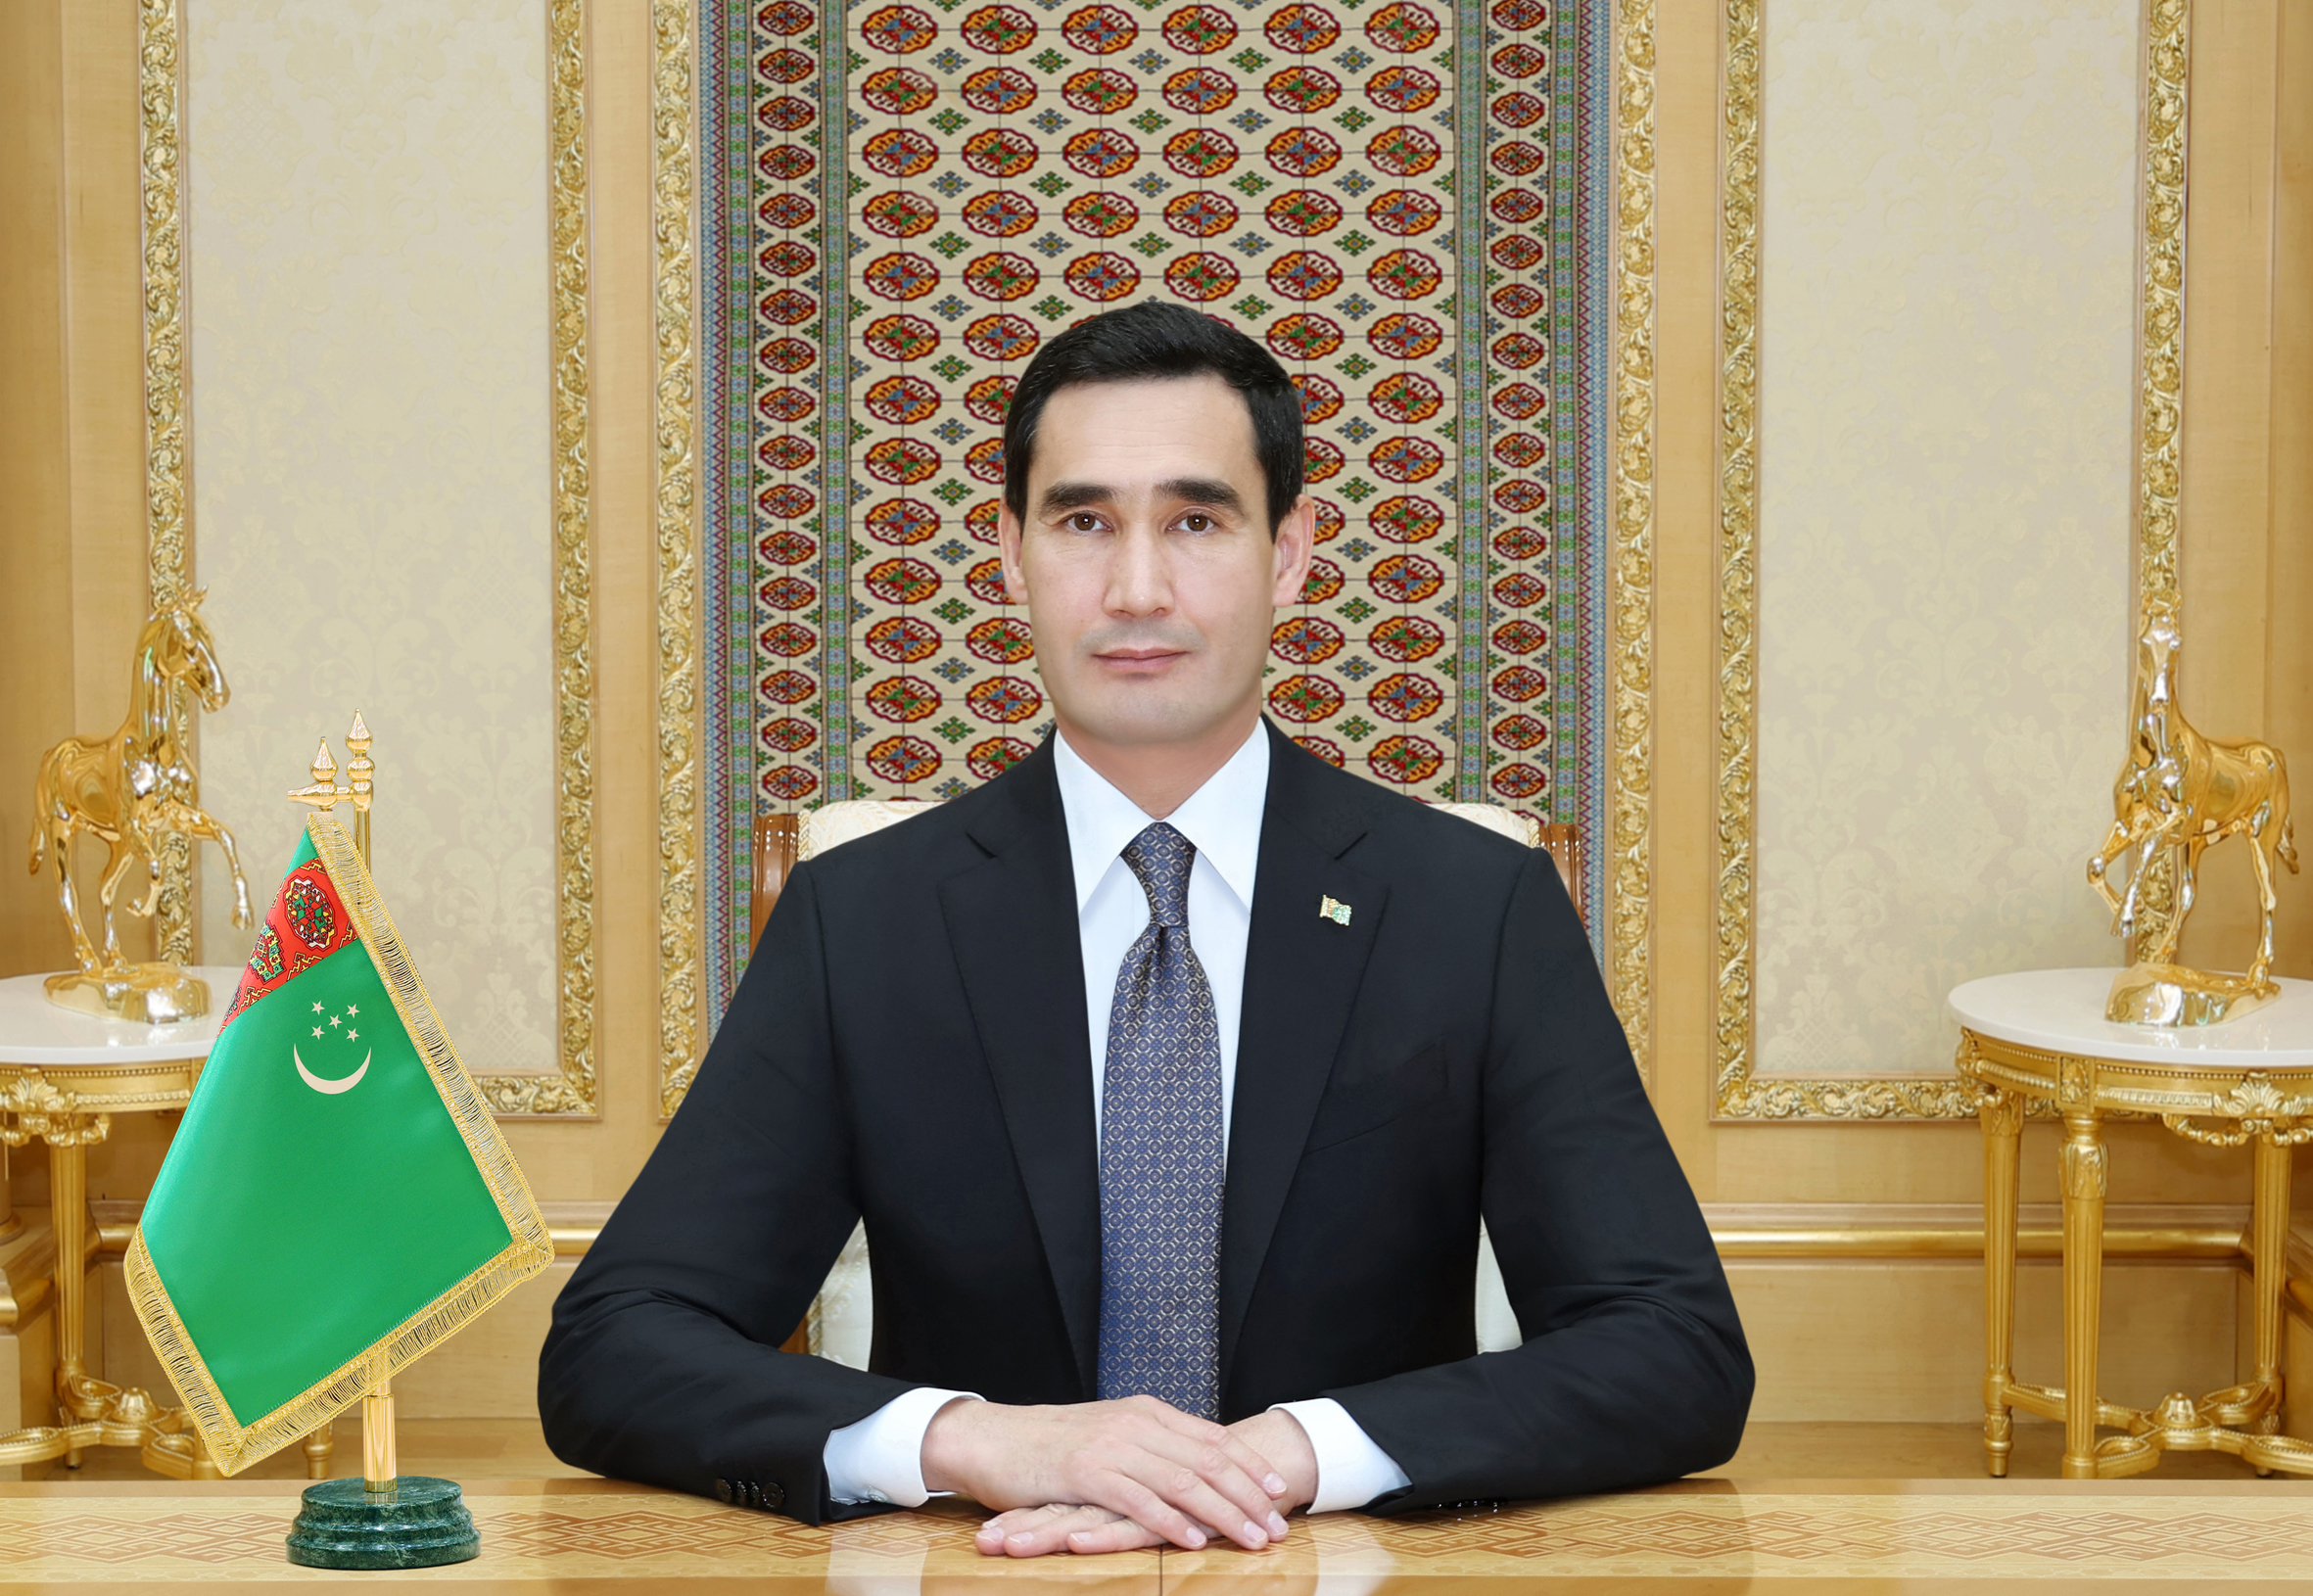 The President of Turkmenistan received the new Ambassador Extraordinary and Plenipotentiary of the Islamic Republic of Pakistan